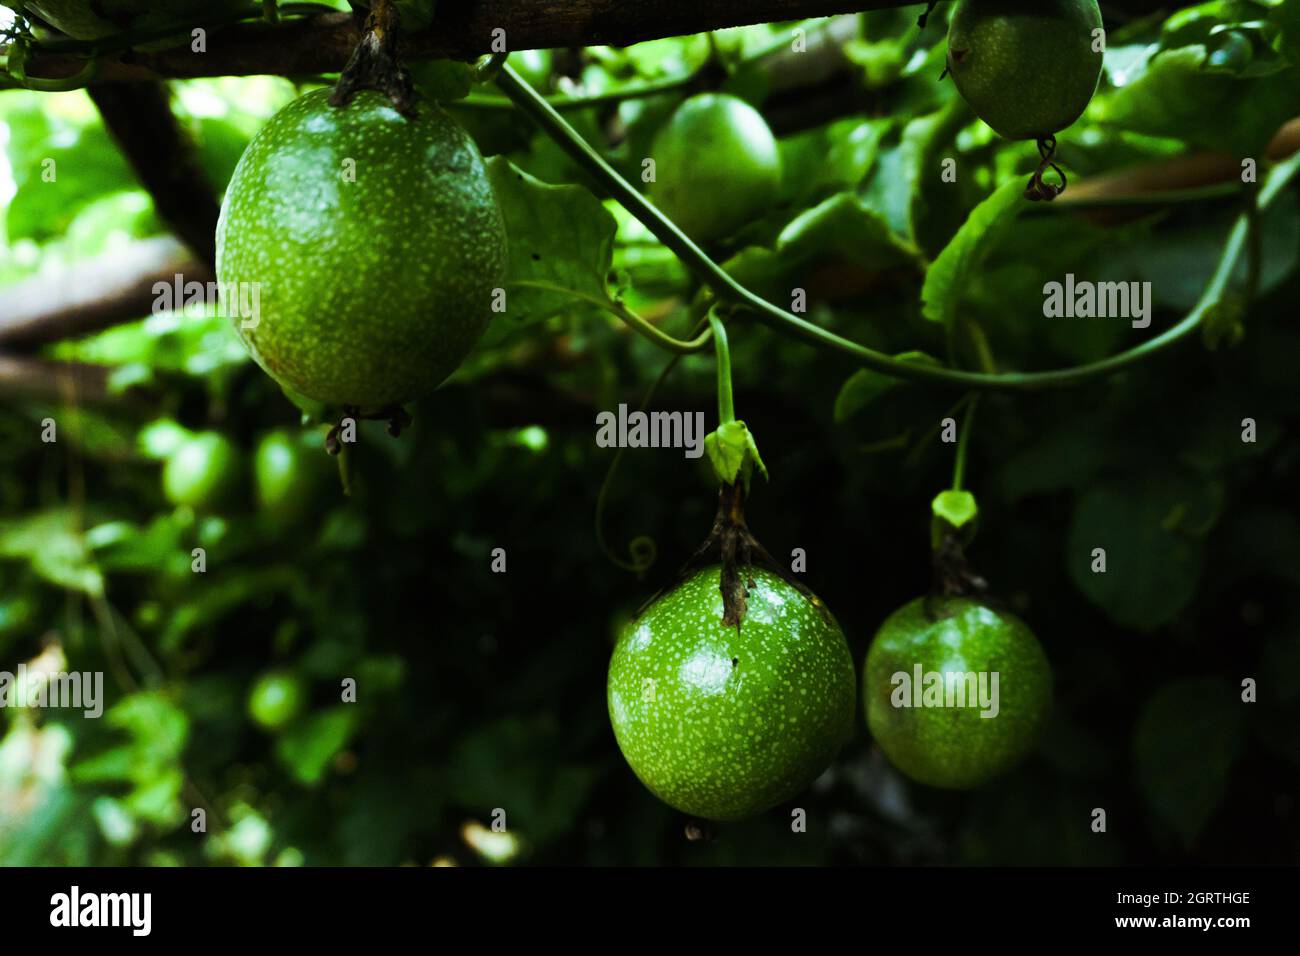 Close-up Of Fruits Growing On Plant Stock Photo